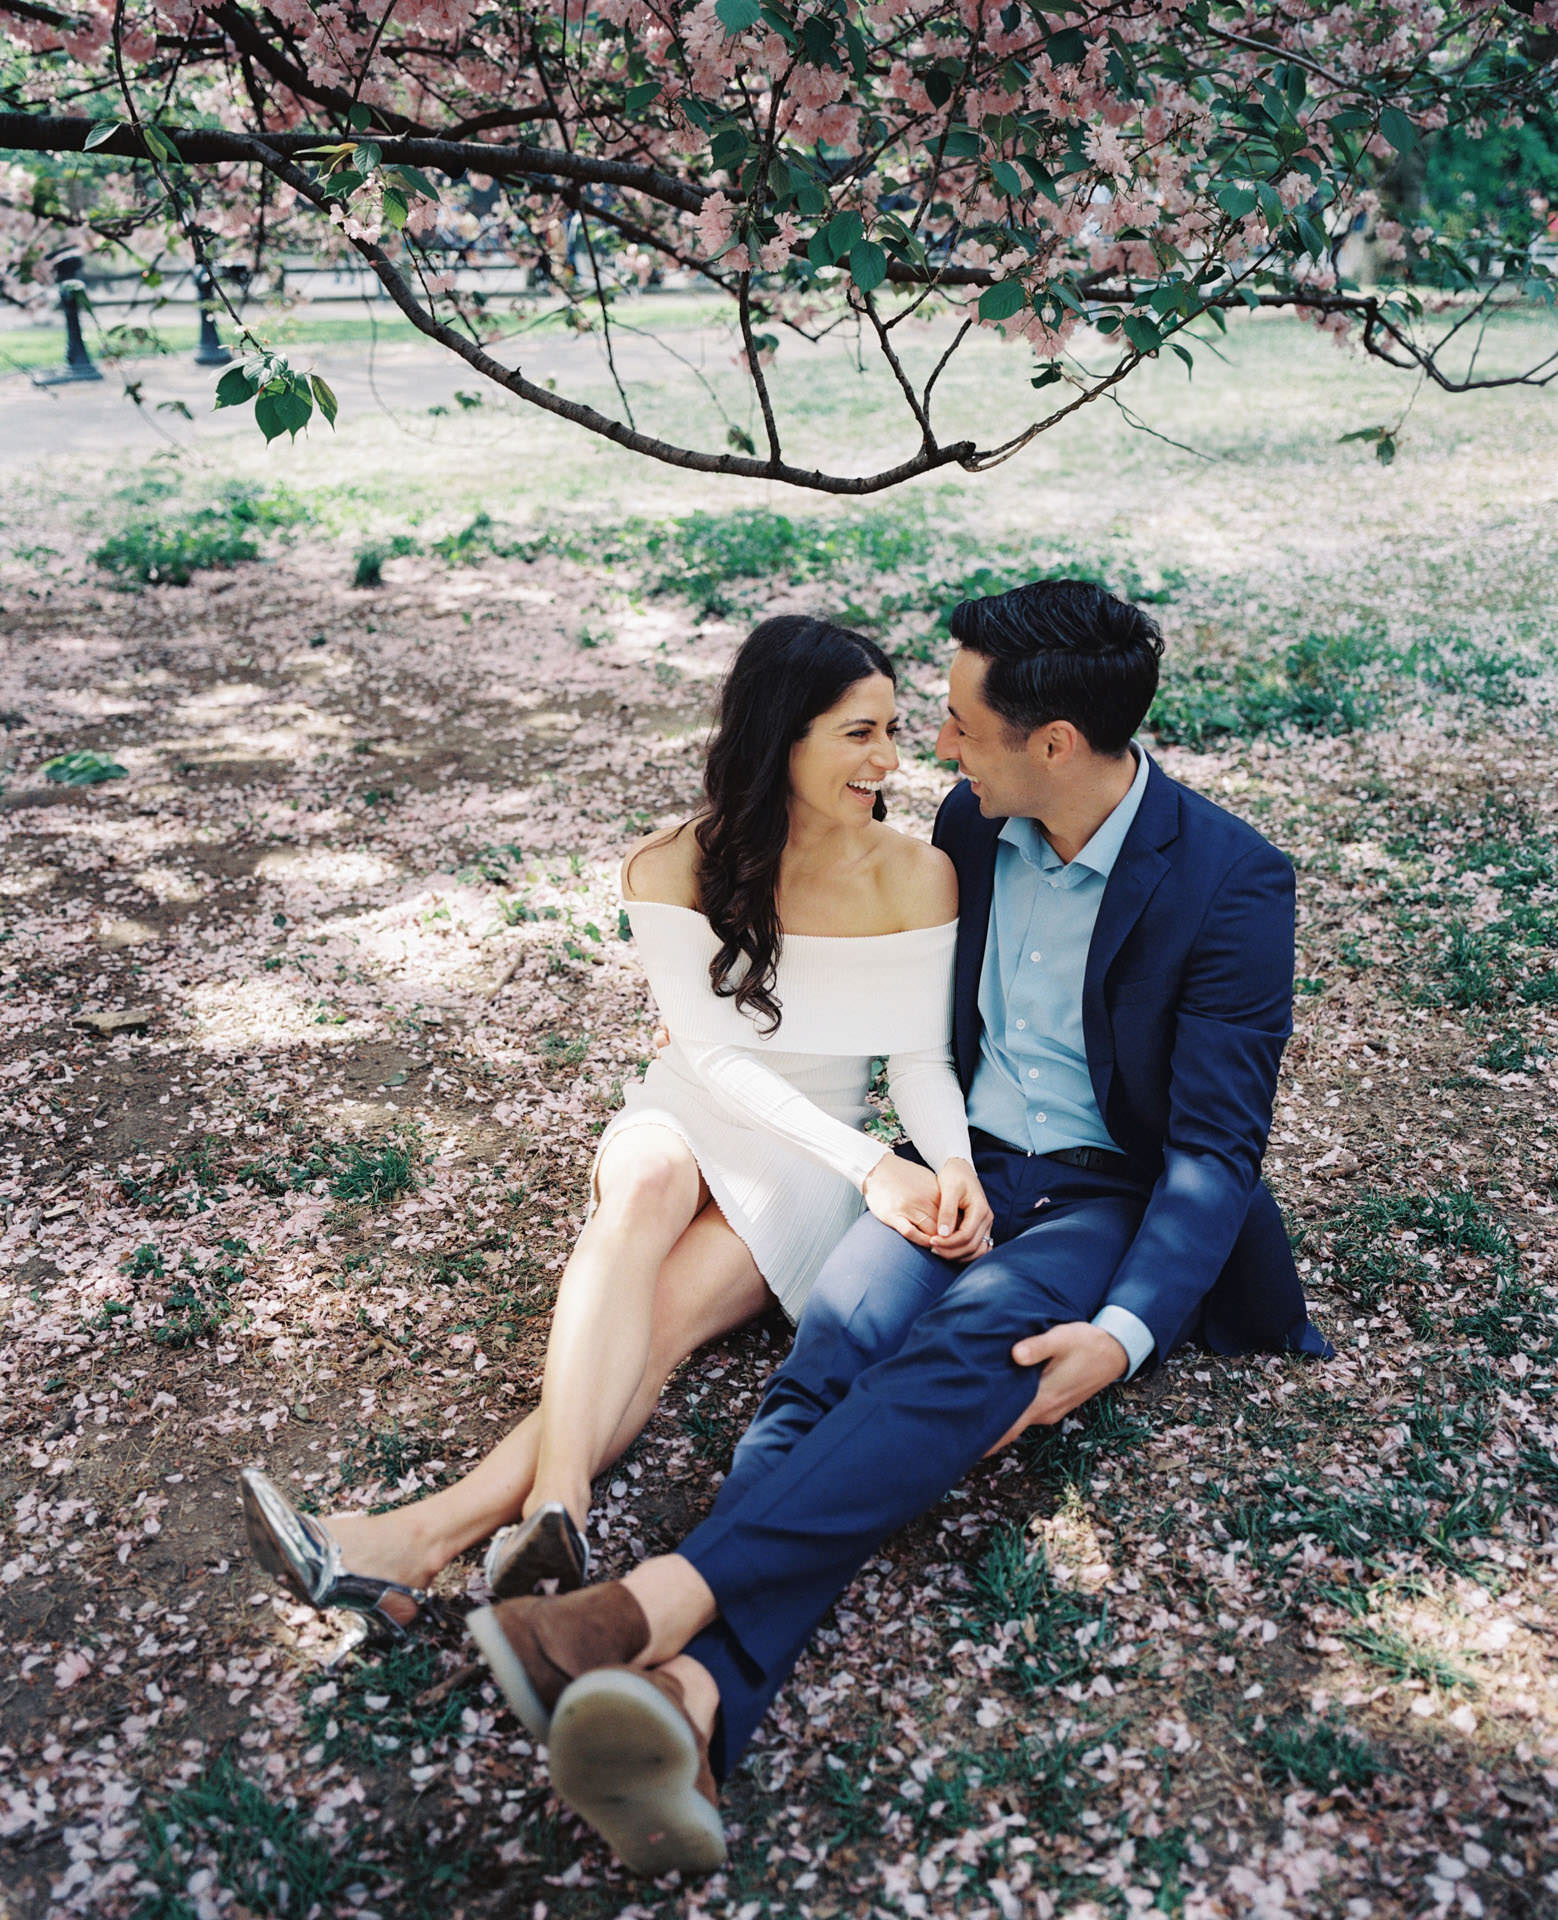 An engaged couple sitting on the grass at Cherry Hill, surrounded by a sea of pink cherry blossoms in full bloom.